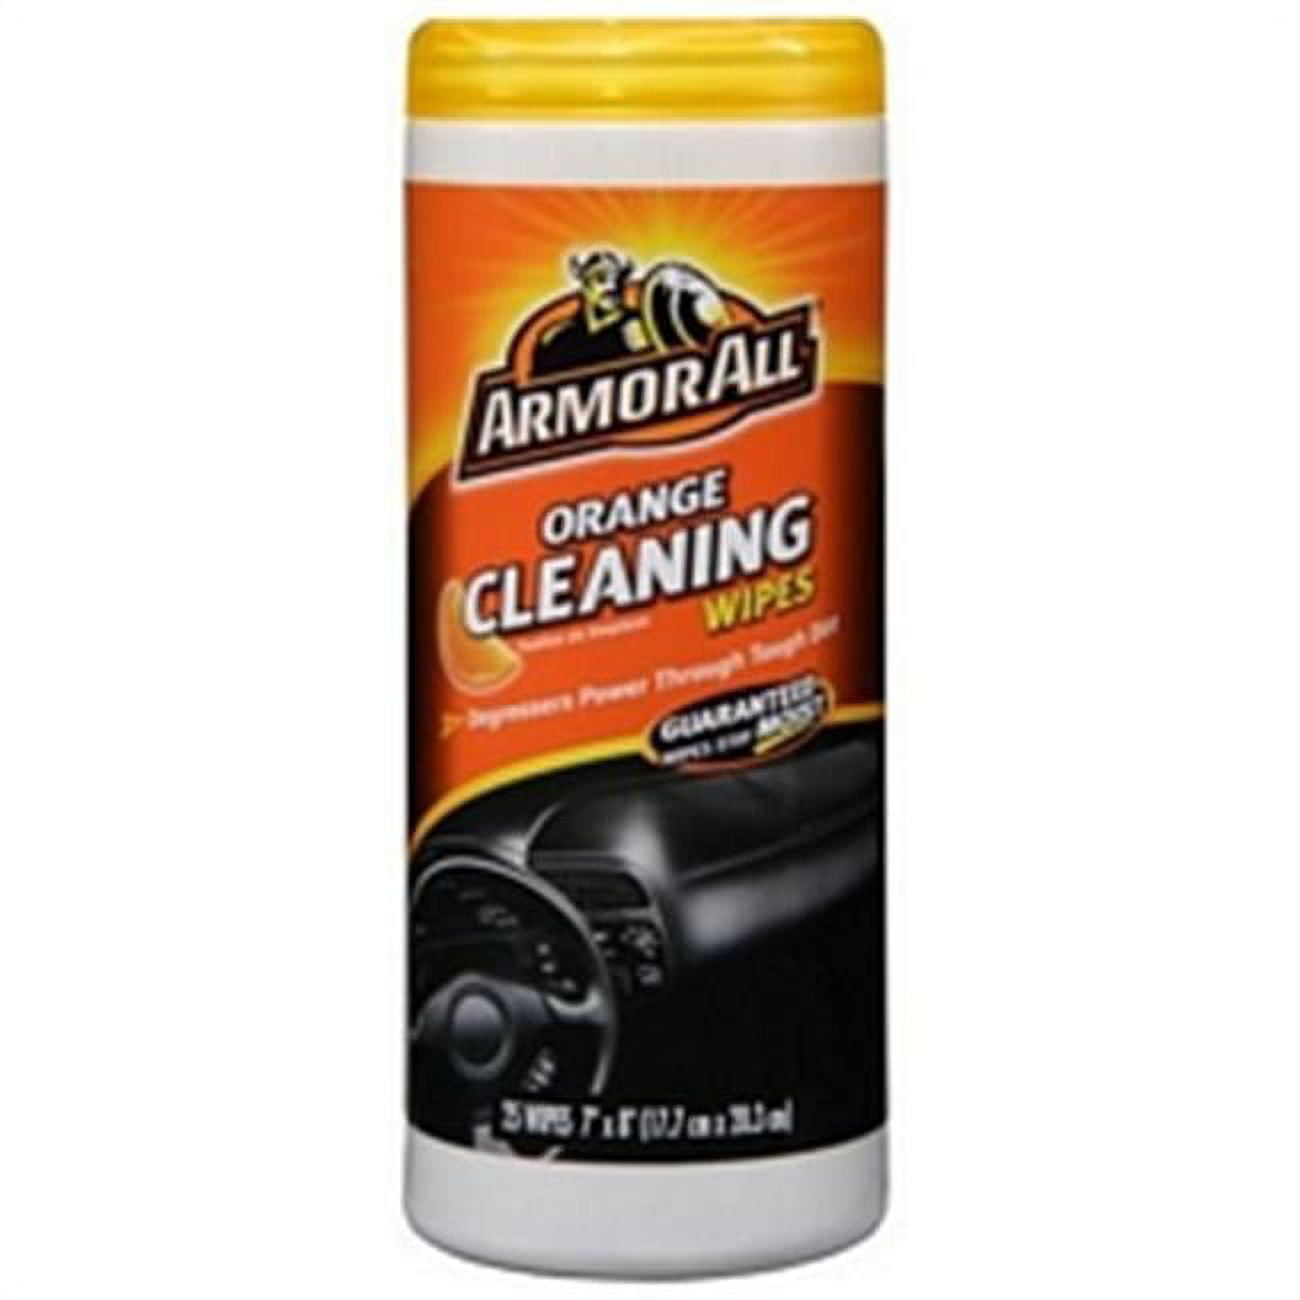 Save on Armor All Cleaning Wipes Orange Order Online Delivery